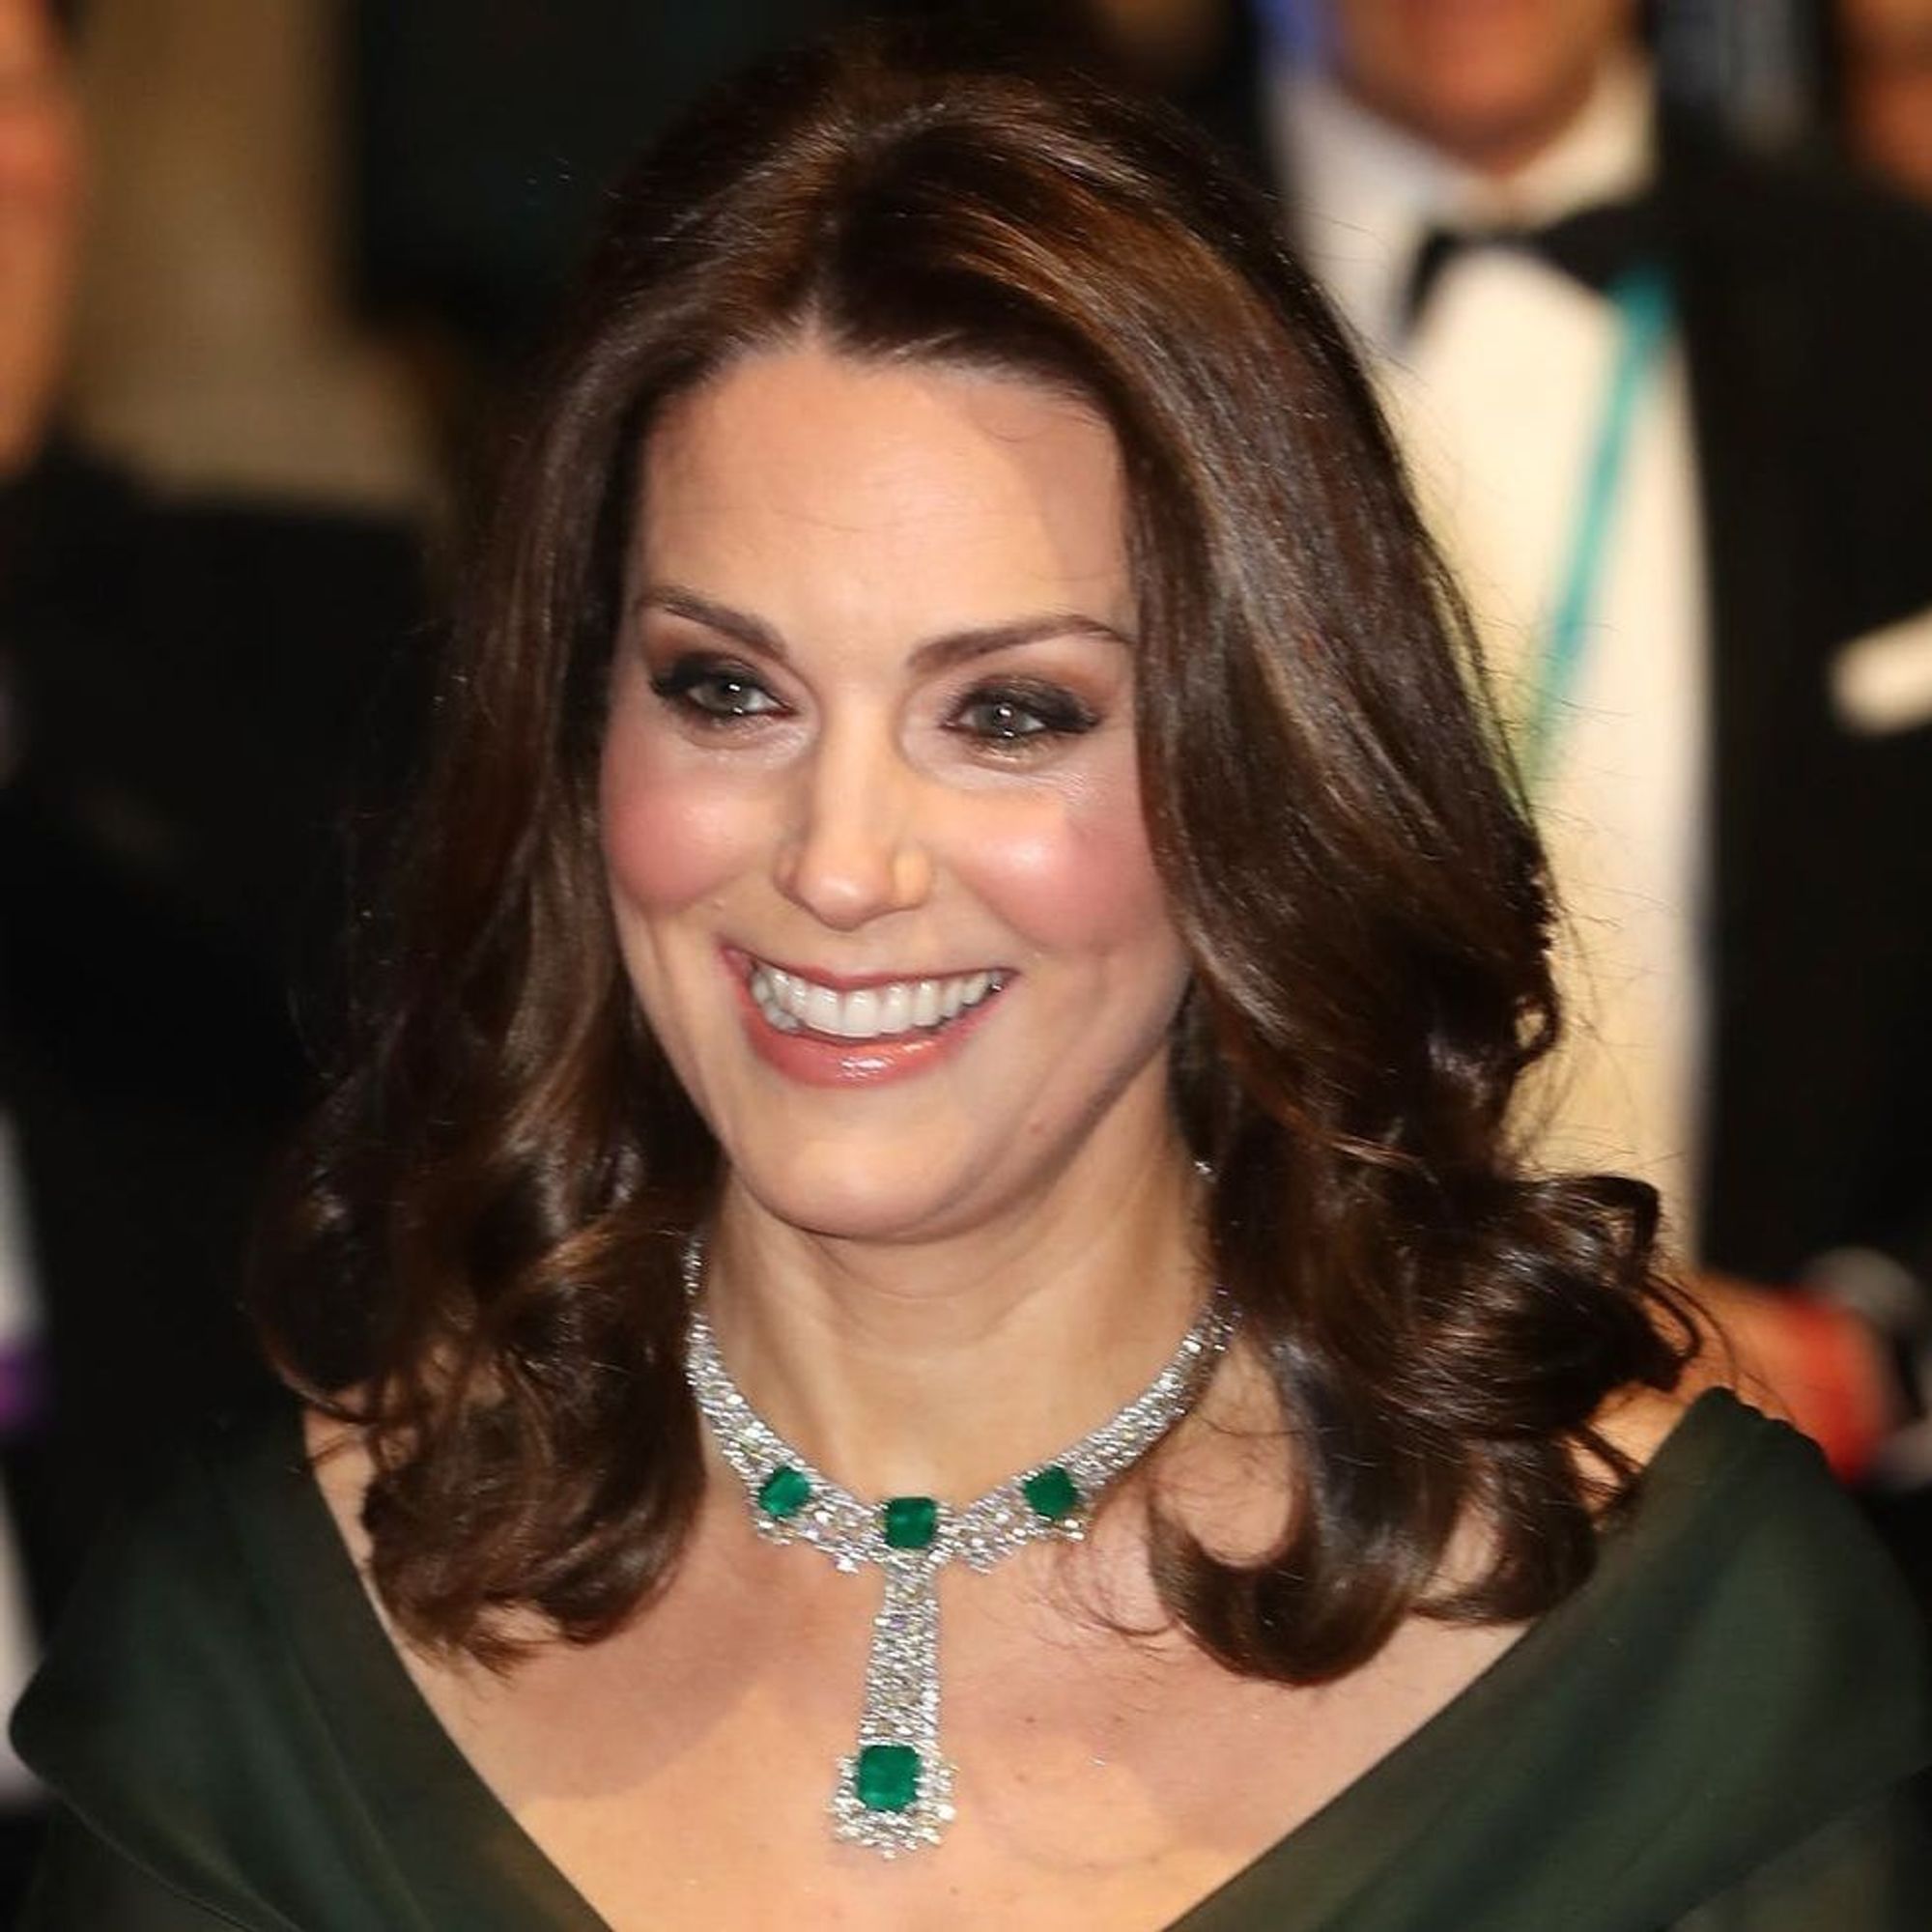 Why Kate Middleton’s BAFTA Awards Gown Has People Up in Arms - Brit + Co